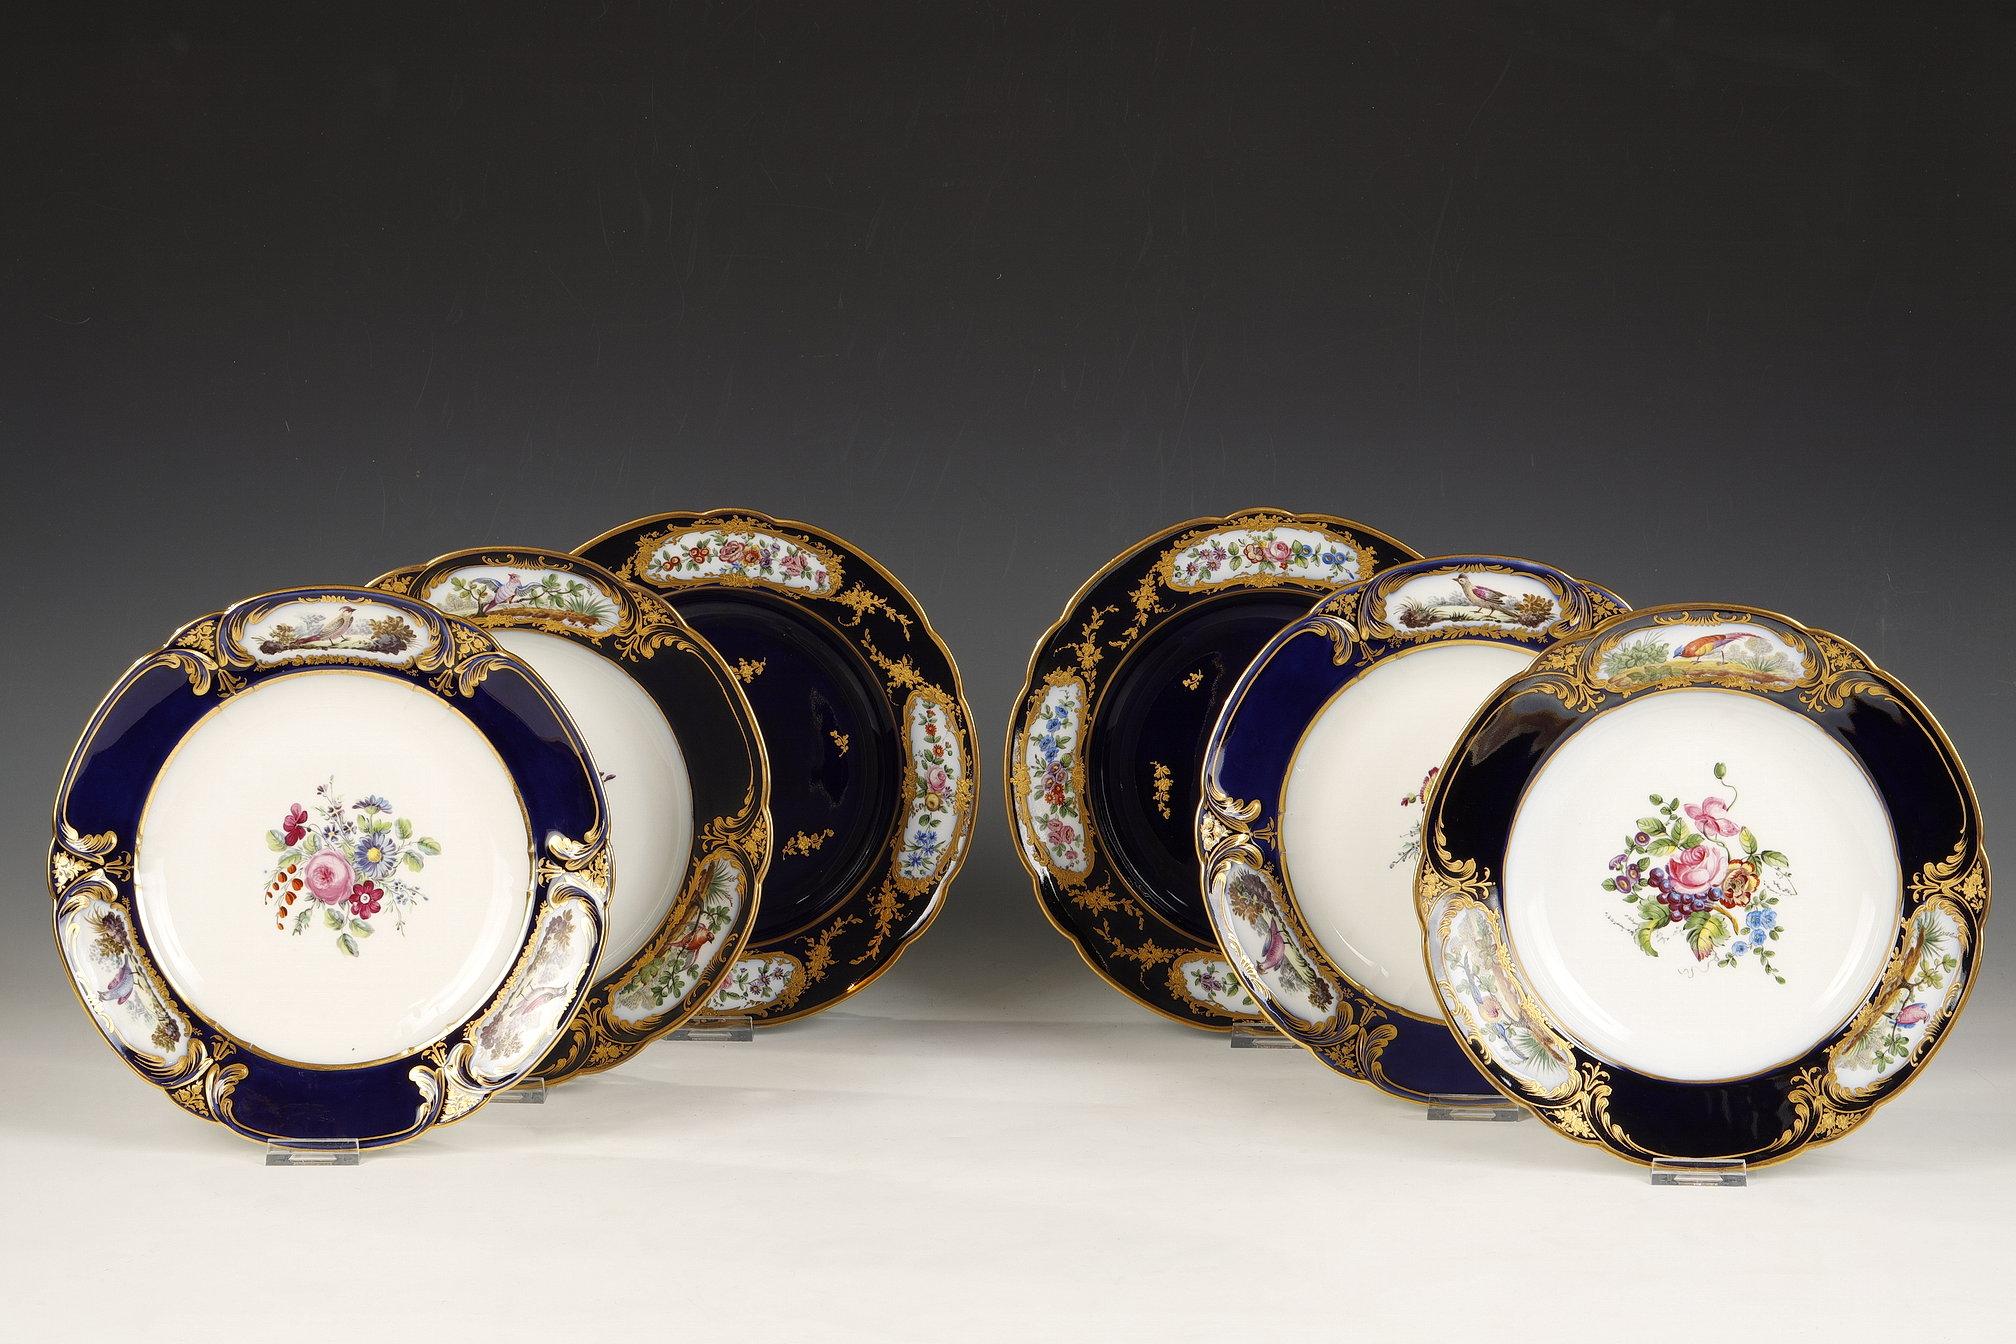 Beautiful set of six porcelain plates, comprising two plates decorated in the center with golden branches on a gros bleu background, and adorned on the border with four bouquets of polychrome flowers in flowery oval gilt cartouches, and four plates